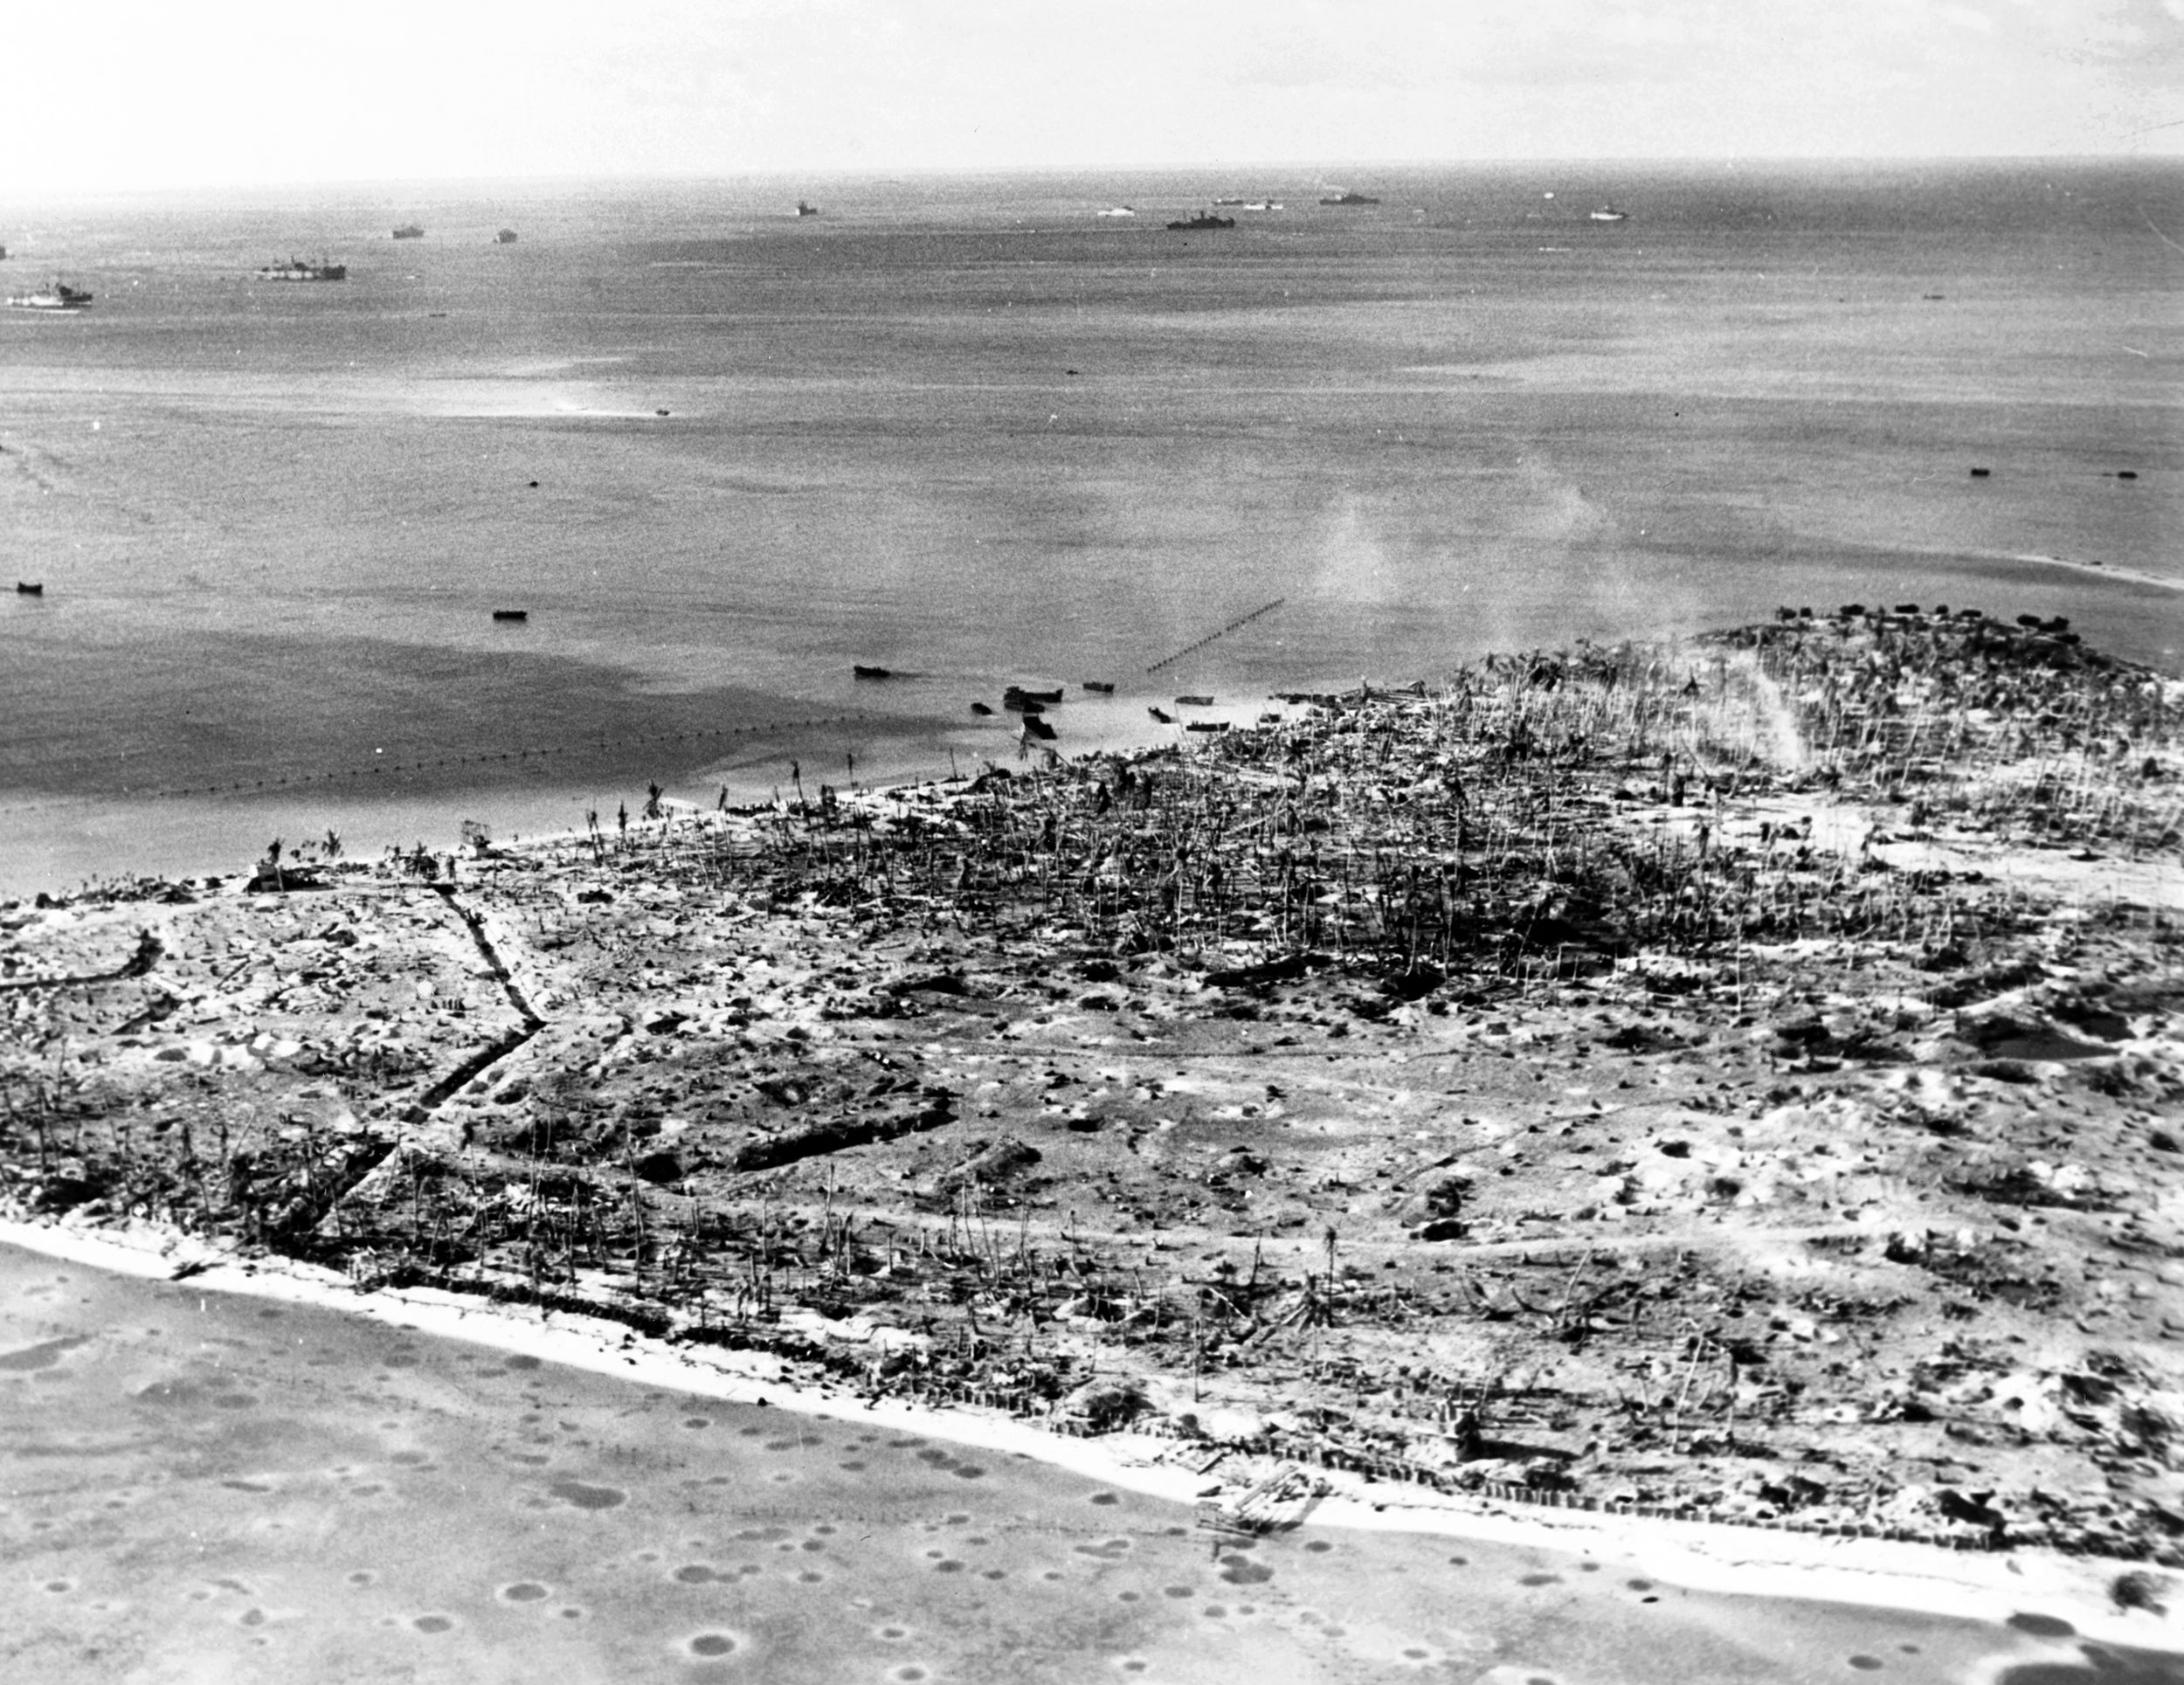 Following the capture of Betio by U.S. Marines in November 1943, this aerial view of the islet's western shore depicts the shell holes and other evidence of the vicious fight for control of Tarawa Atoll. The victims of the mass execution that occurred in at Betio in October 1942 are believed to have been buried in the area marked in red.